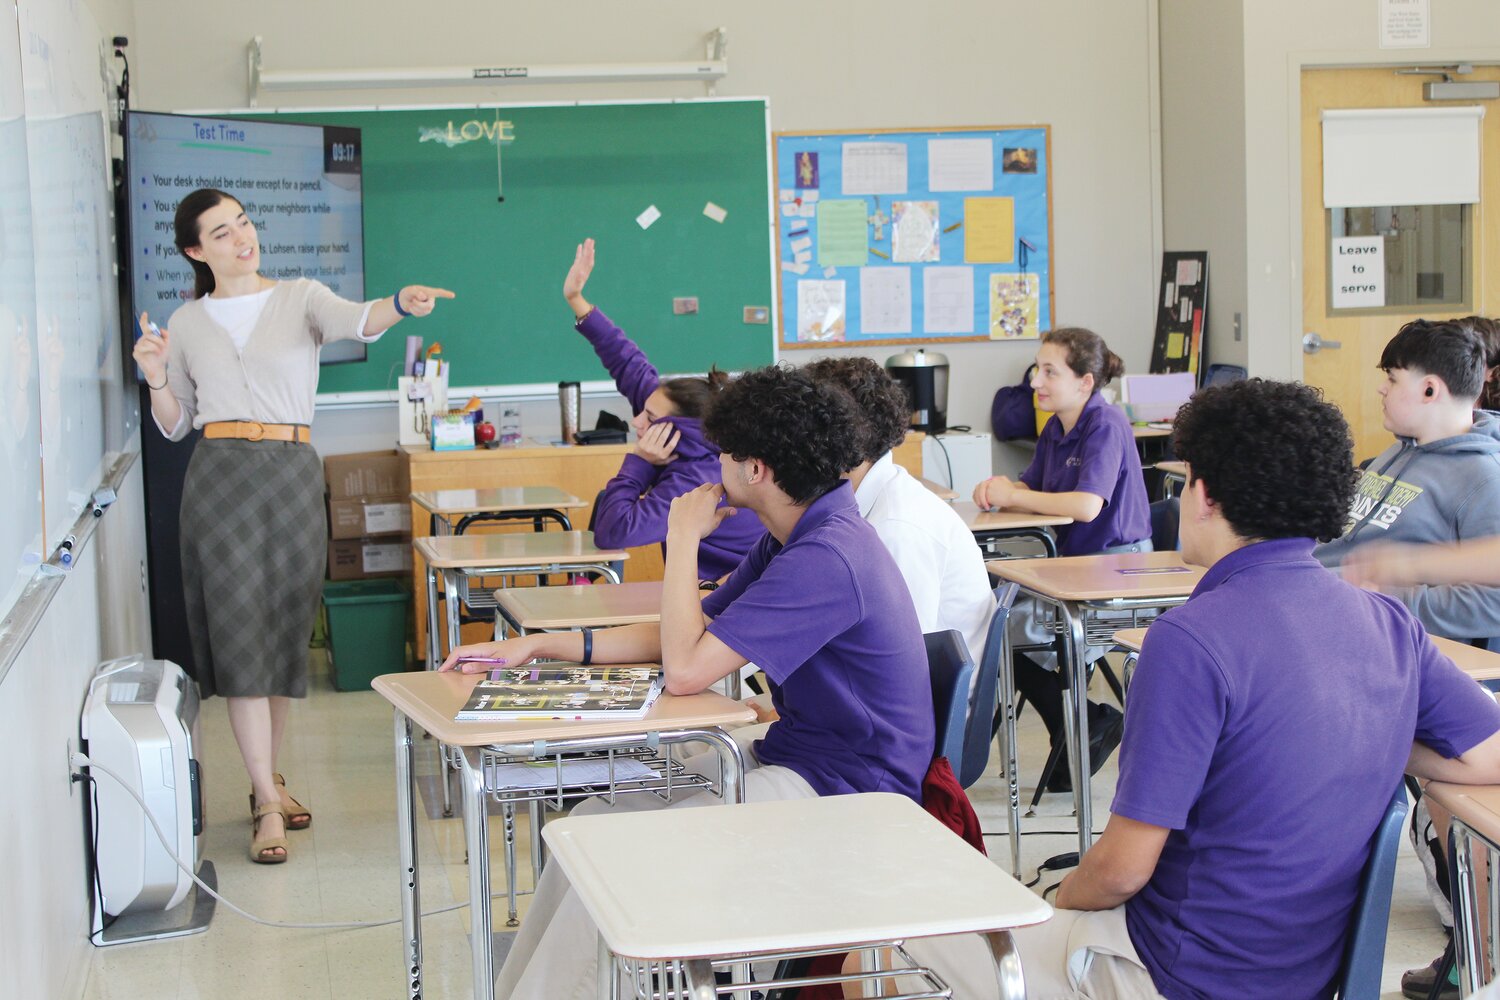 Viola Lohsen, a graduate of the Catholic Universty of America, teaches a group of her students at St. Raphael Academy during a year of service while earning her master’s degree at Providence College as part of the PACT program.